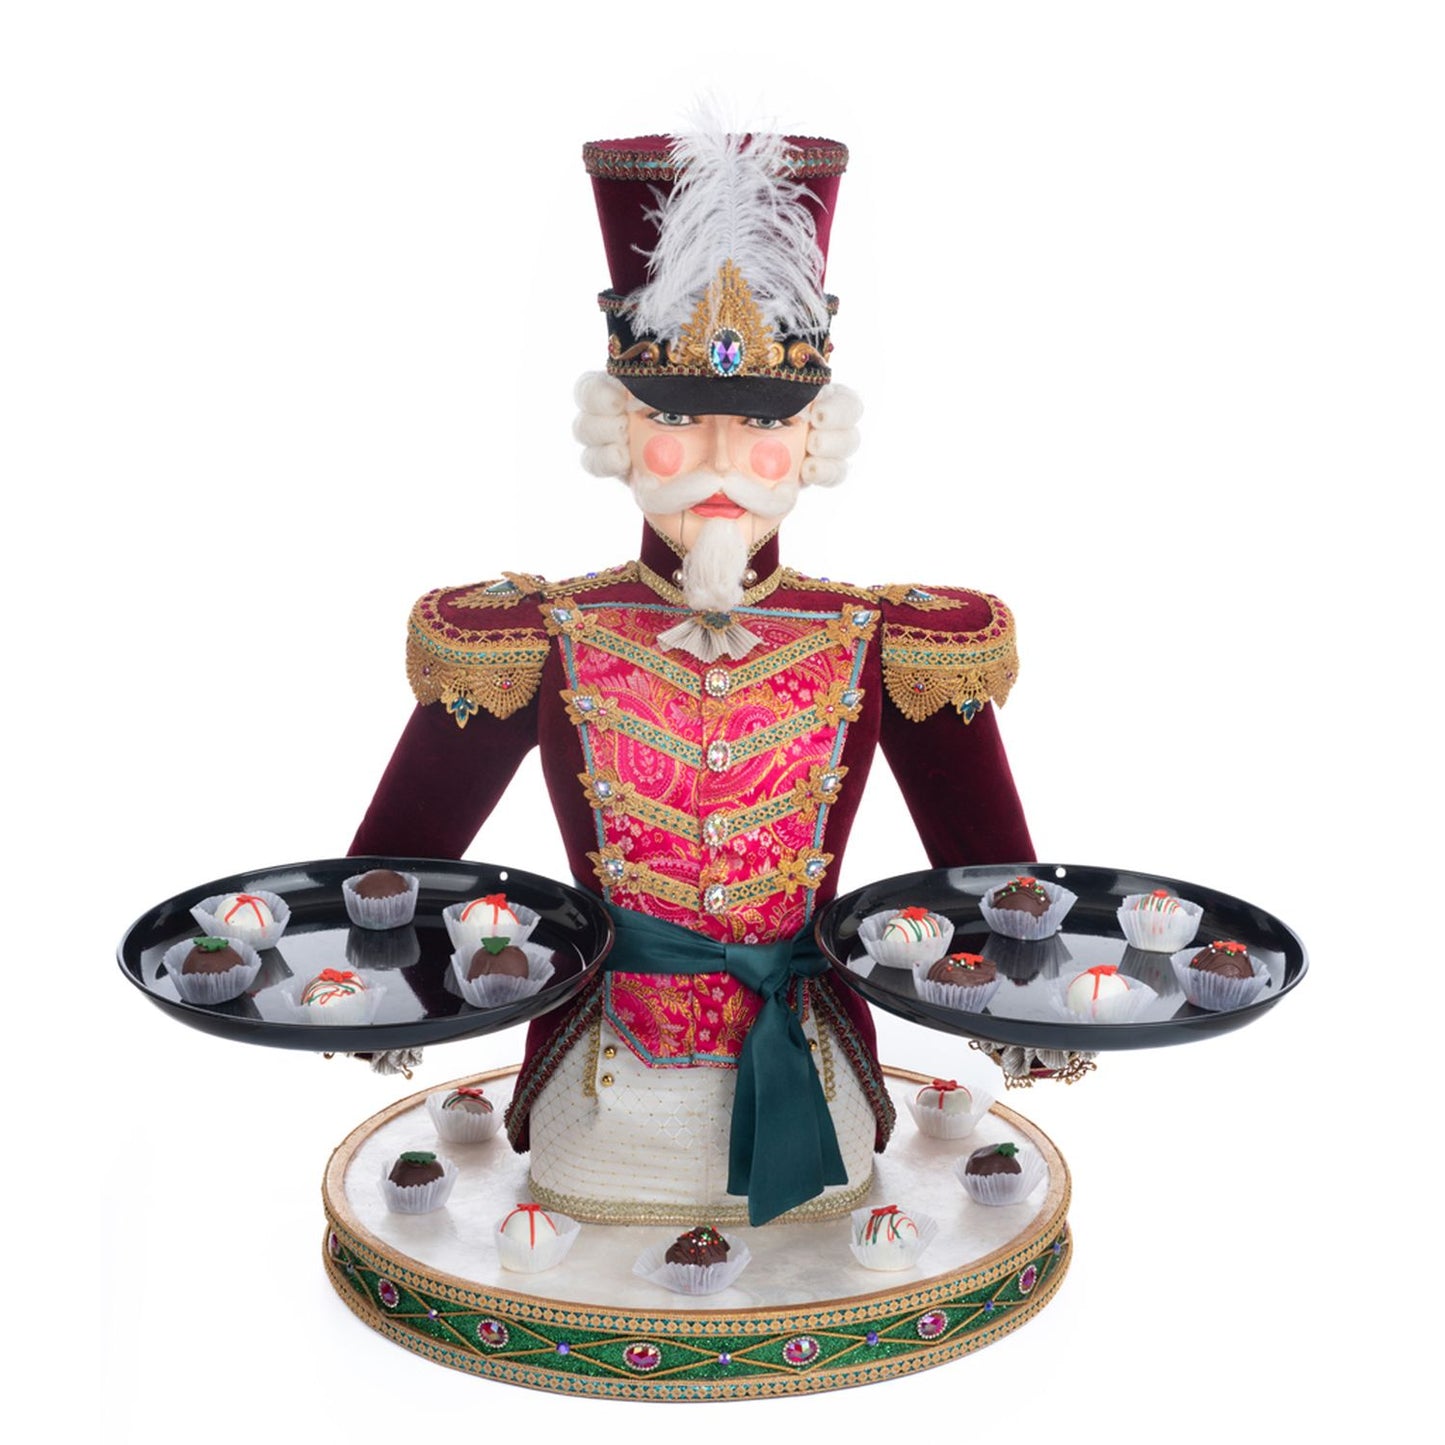 Katherine's Collection Nutcracker Server, 26.75x24x27 Inches, Red/White Resin